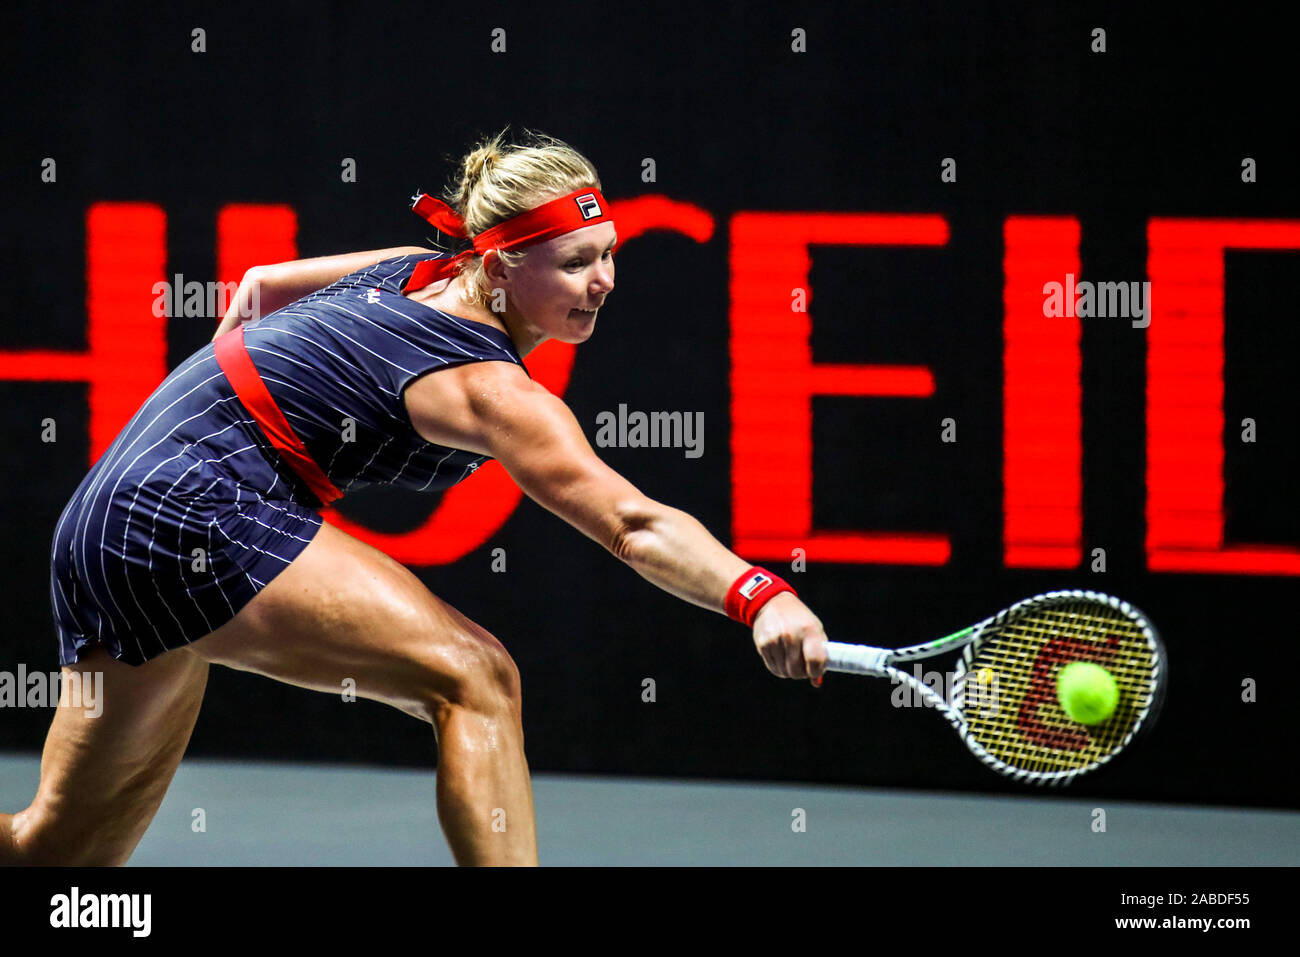 Dutch professional tennis player Kiki Bertens competes against Australian professional tennis player Ashleigh Barty during a group match of WTA Finals Stock Photo